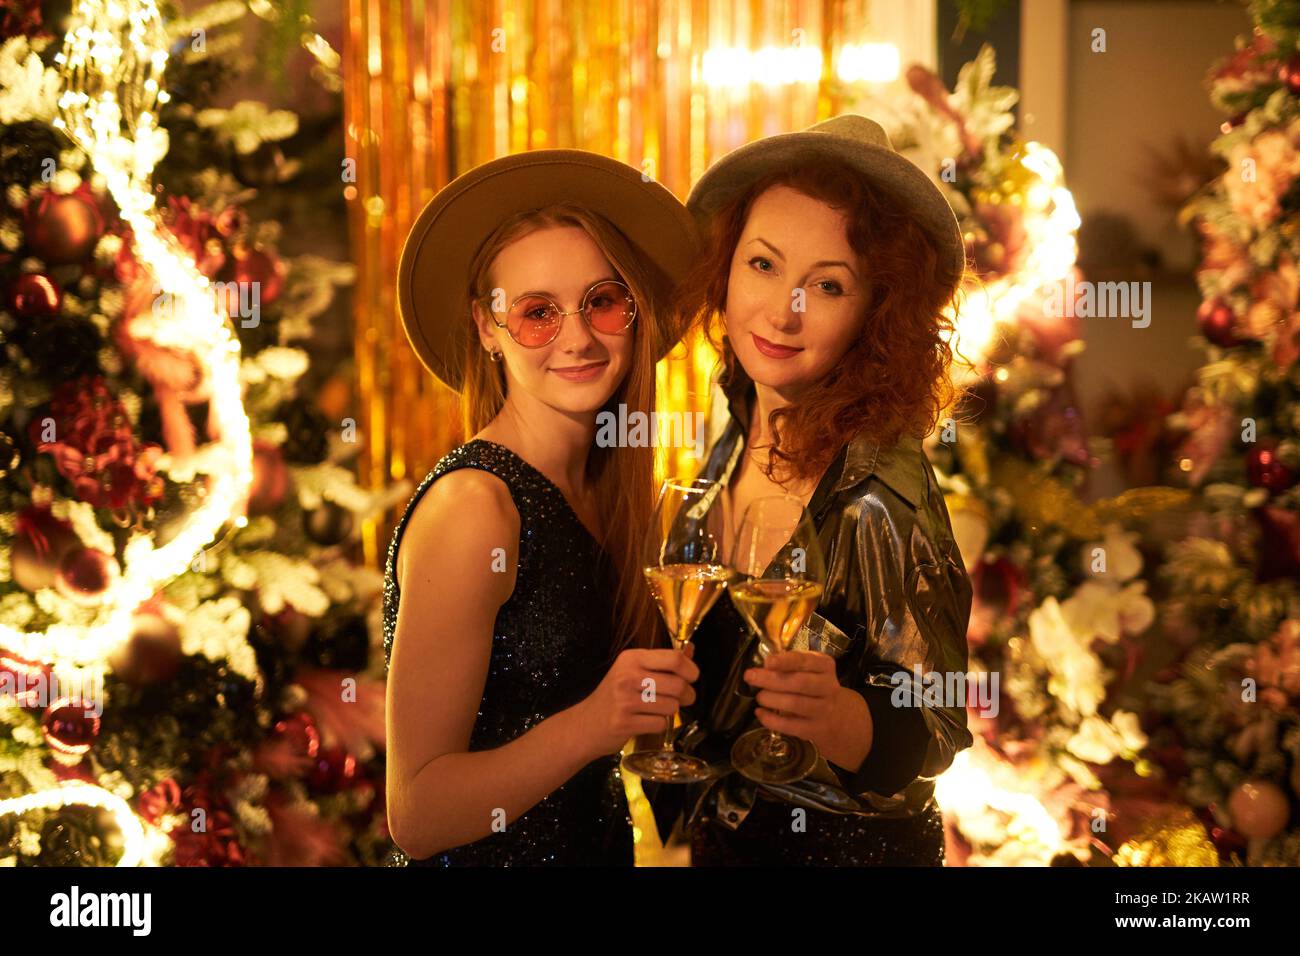 Happy and fun emotion during Christmas party. Caucasian mom and daughter talking with lights background. Females in hats holding glasses of sparkling wine during New Year's eve. High quality image Stock Photo